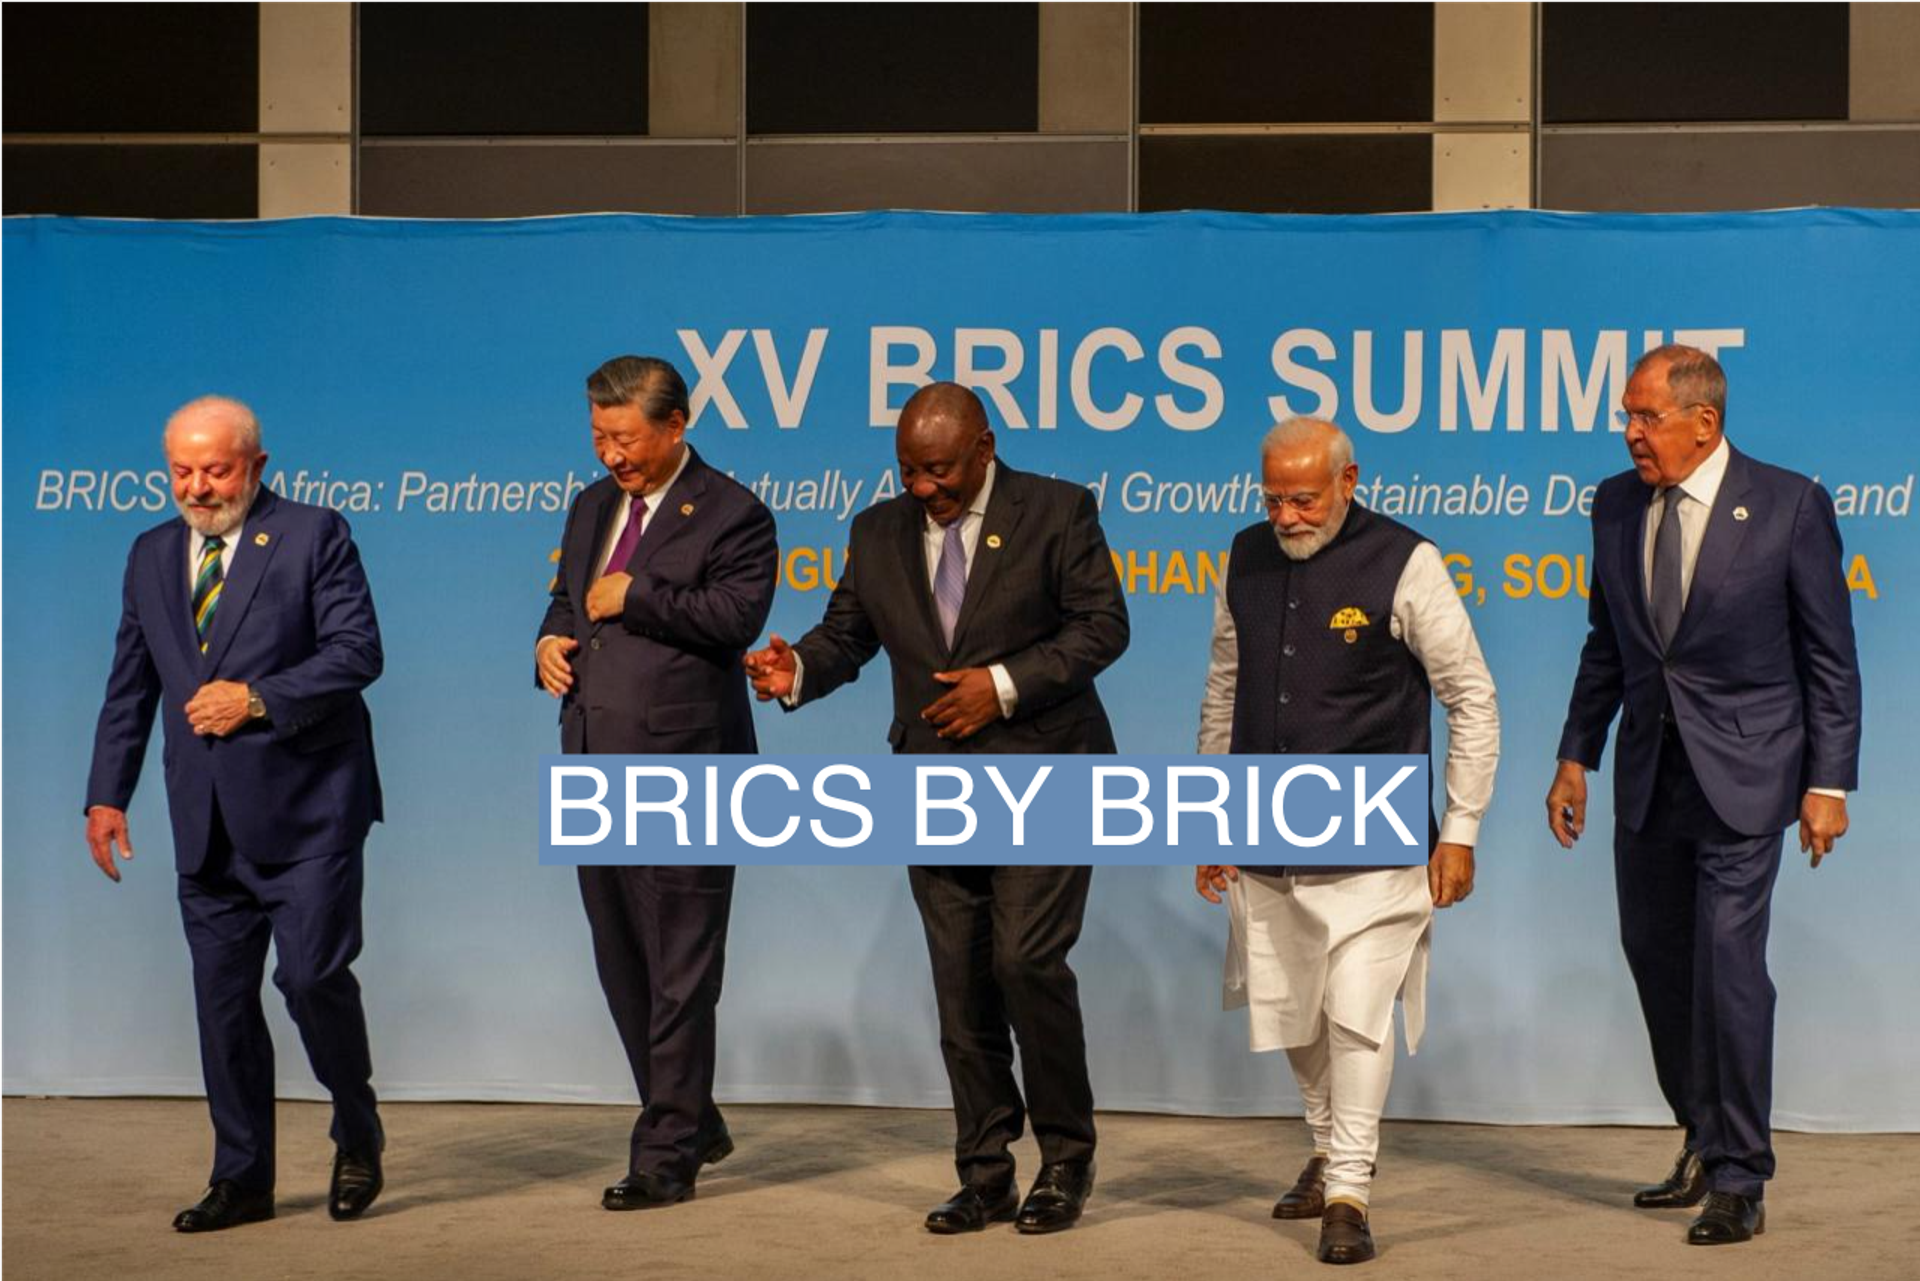 Brazil's President Luiz Inacio Lula da Silva, China's President Xi Jinping, South African President Cyril Ramaphosa, Indian Prime Minister Narendra Modi and Russia's Foreign Minister Sergei Lavrov walk after posing for a picture at the BRICS Summit in Johannesburg, South Africa August 23, 2023. REUTERS/Alet Pretorius/Pool